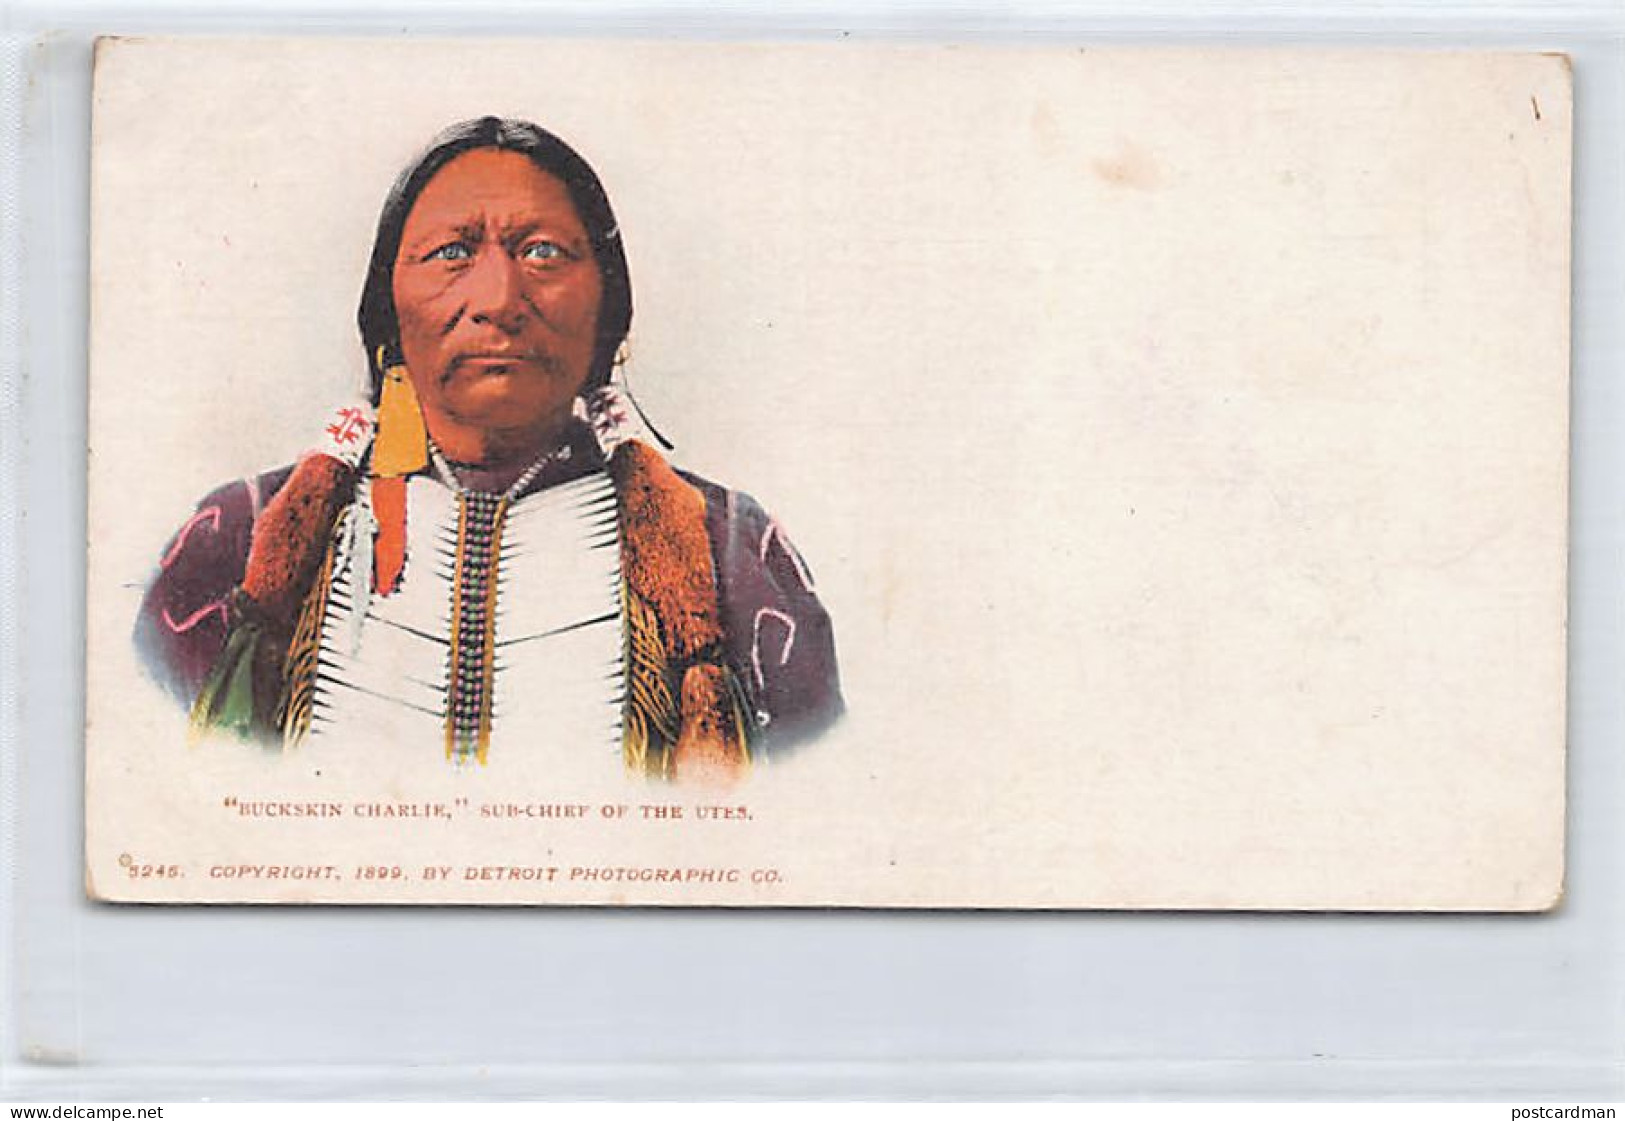 Usa - Native Americana - Buckskin Charlie, Sub-chief Of The Utes - Publ. Detroit Photographic Co. 5245 - Indiaans (Noord-Amerikaans)